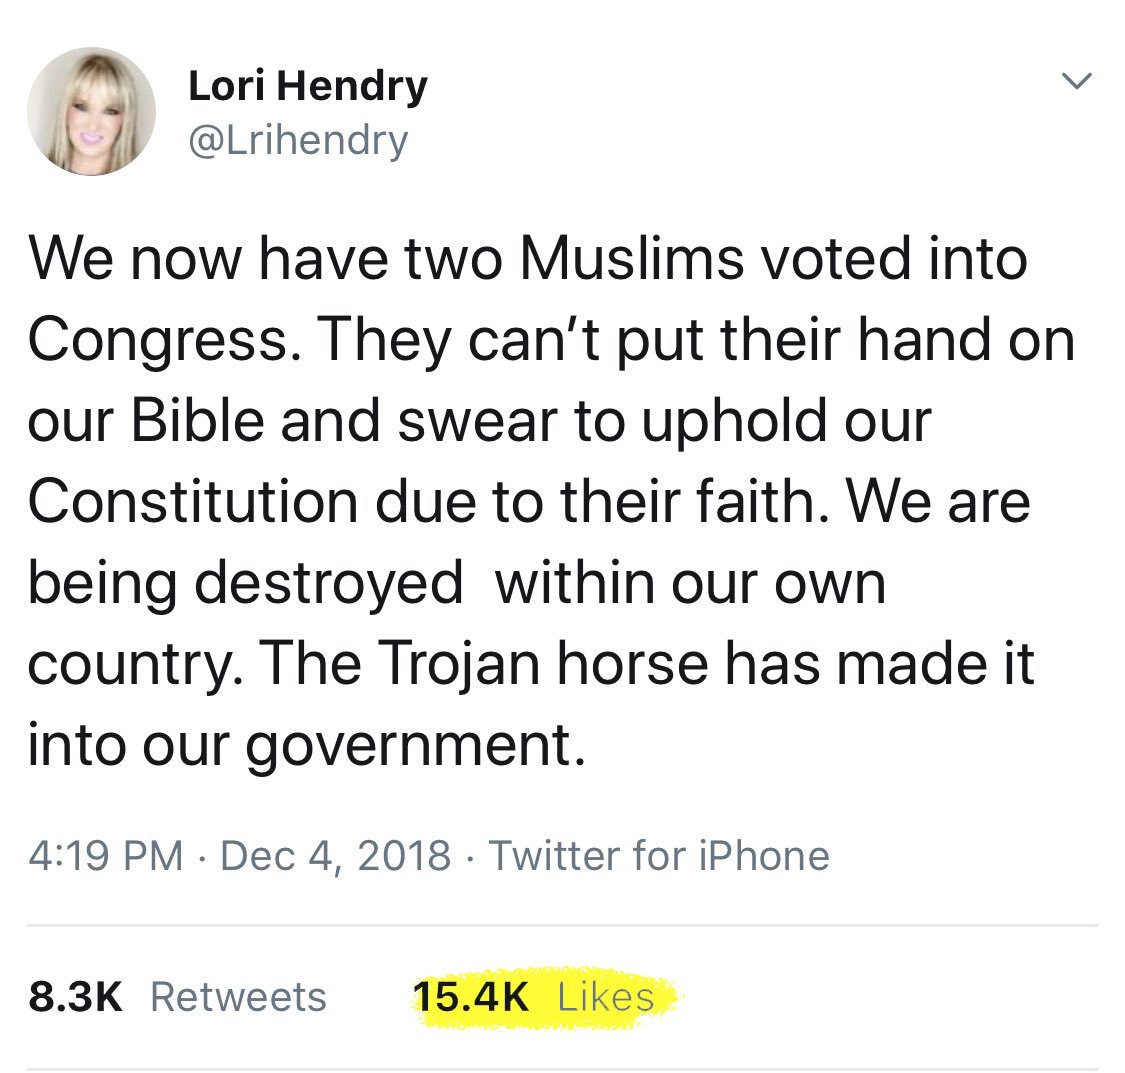 “No religious test shall ever be required as a qualification to any office or public trust under the United States.” US Constitution, Article VI, Clause 3. Why does Lori Hendry hate the Constitution so much? Please pray to any god that she learns to - finally - love America.🙏